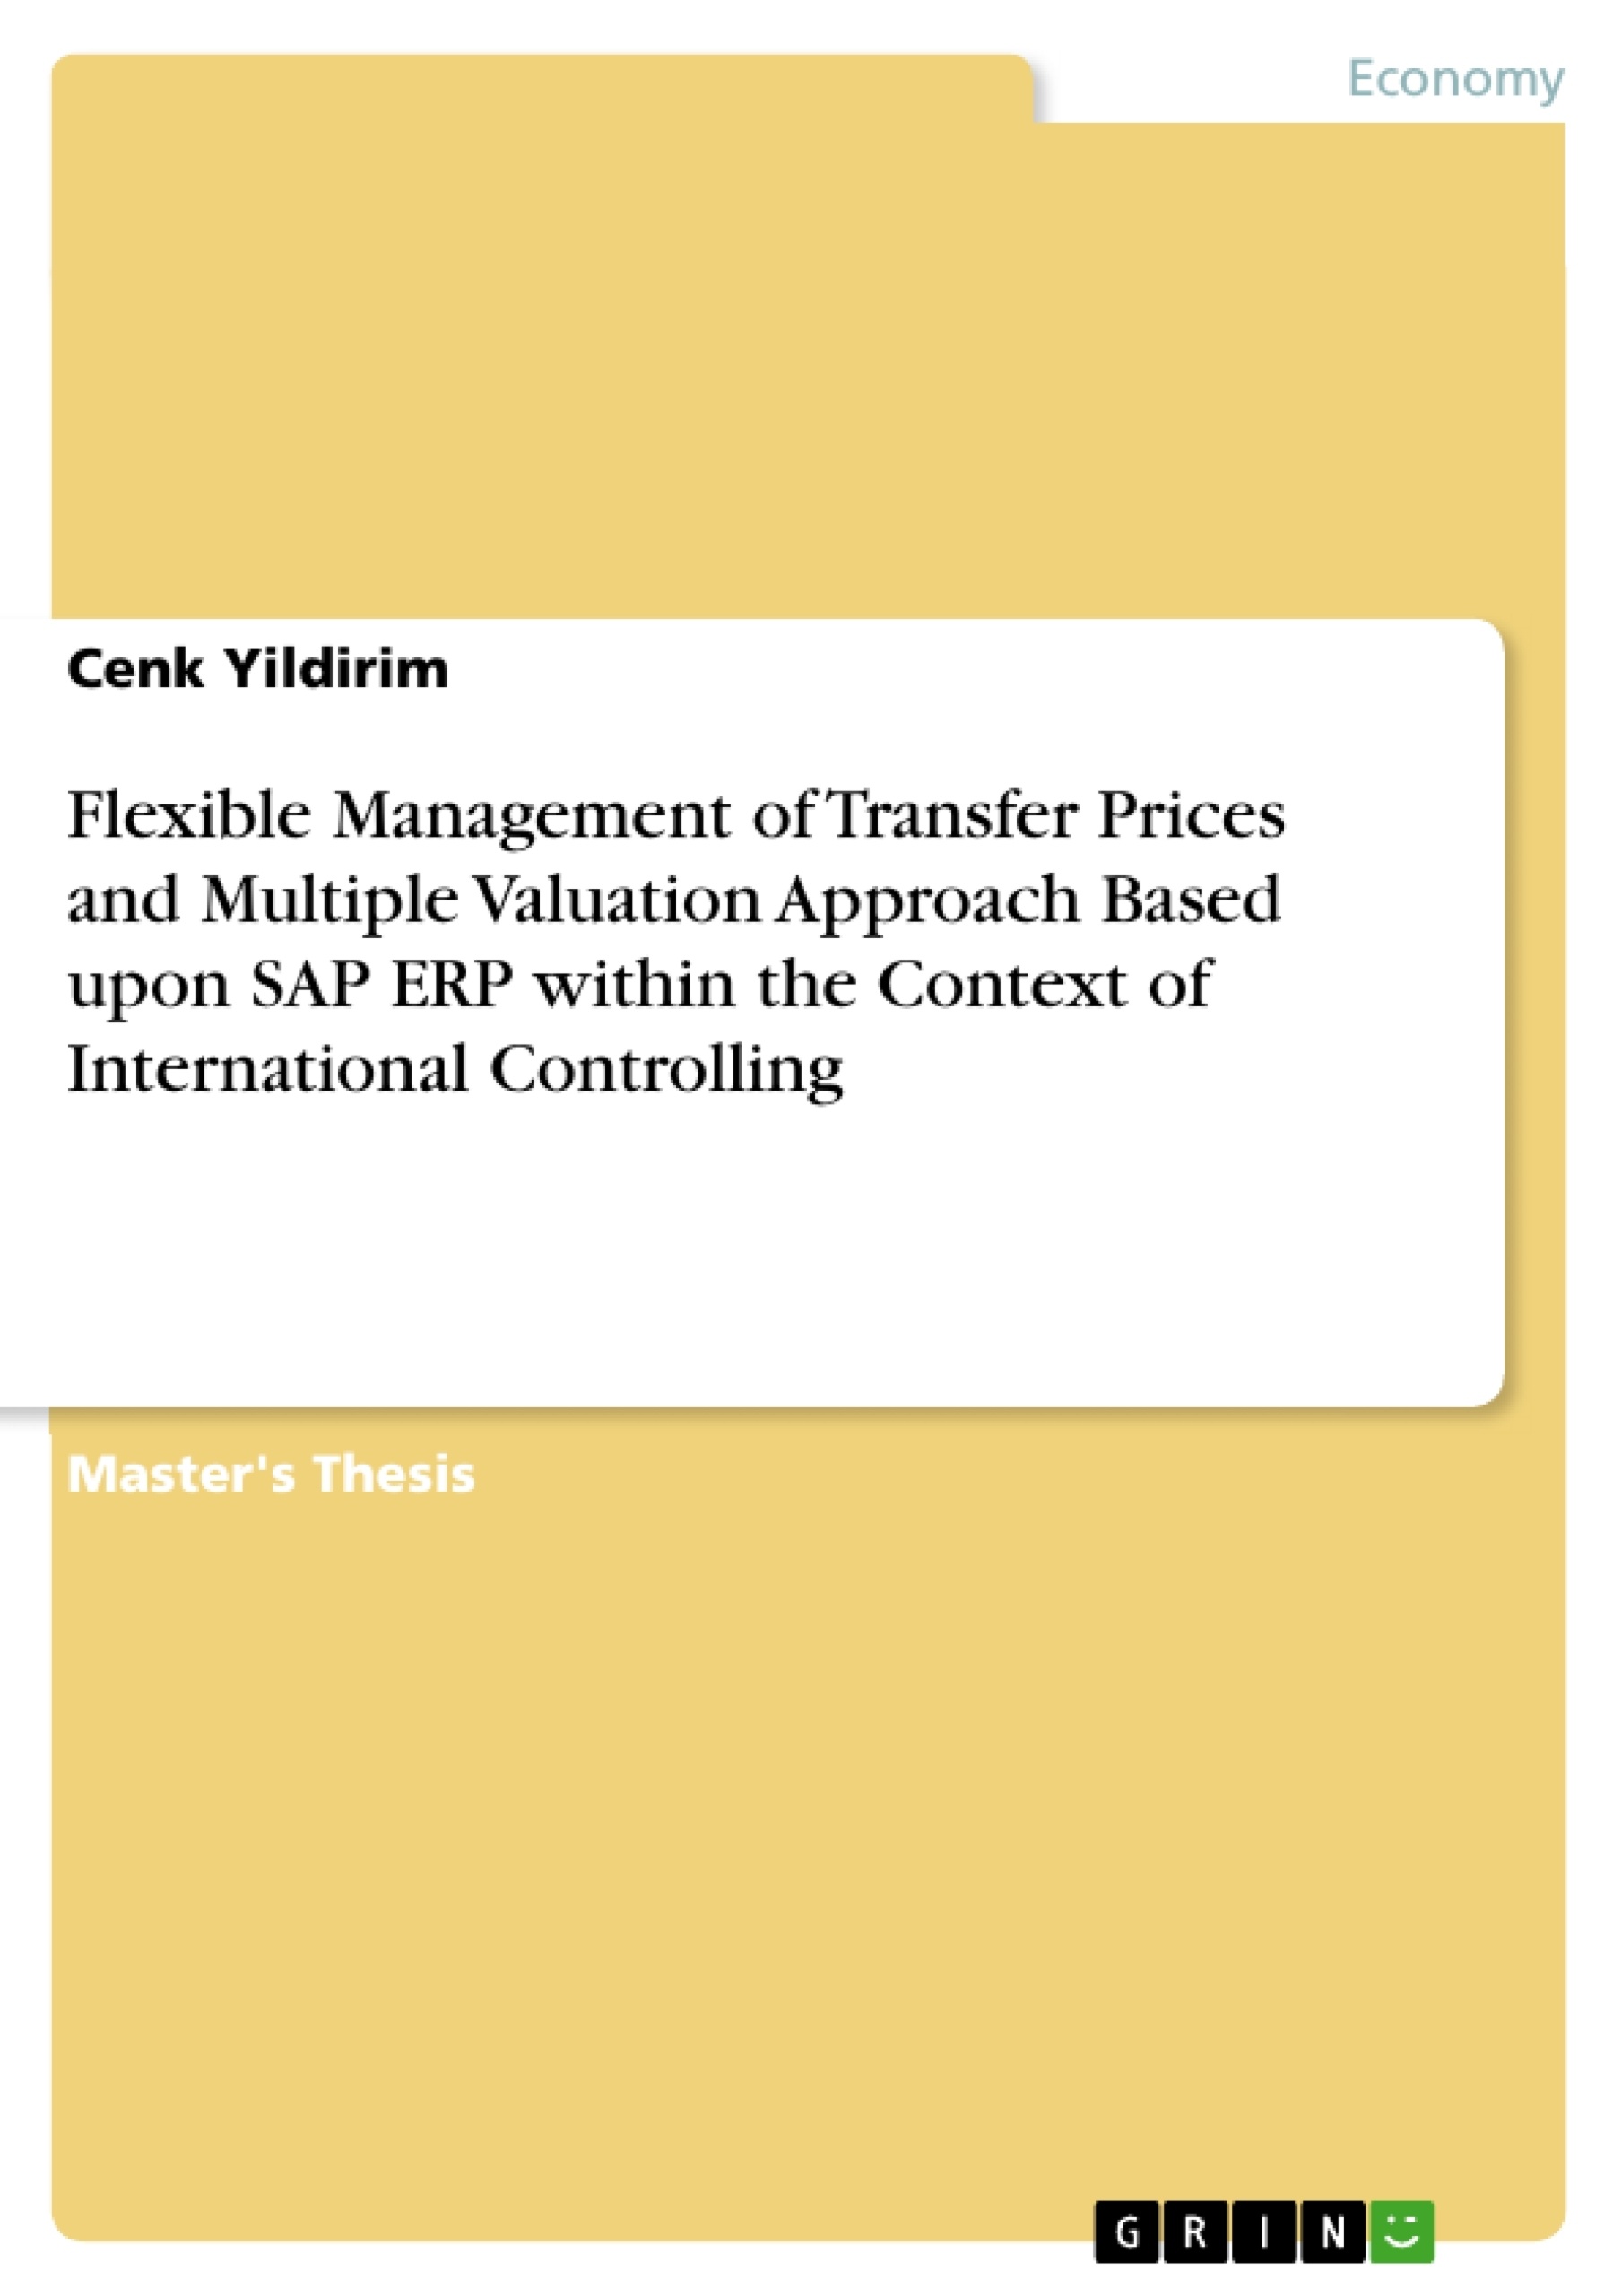 Title: Flexible Management of Transfer Prices and Multiple Valuation Approach Based upon SAP ERP within the Context of International Controlling